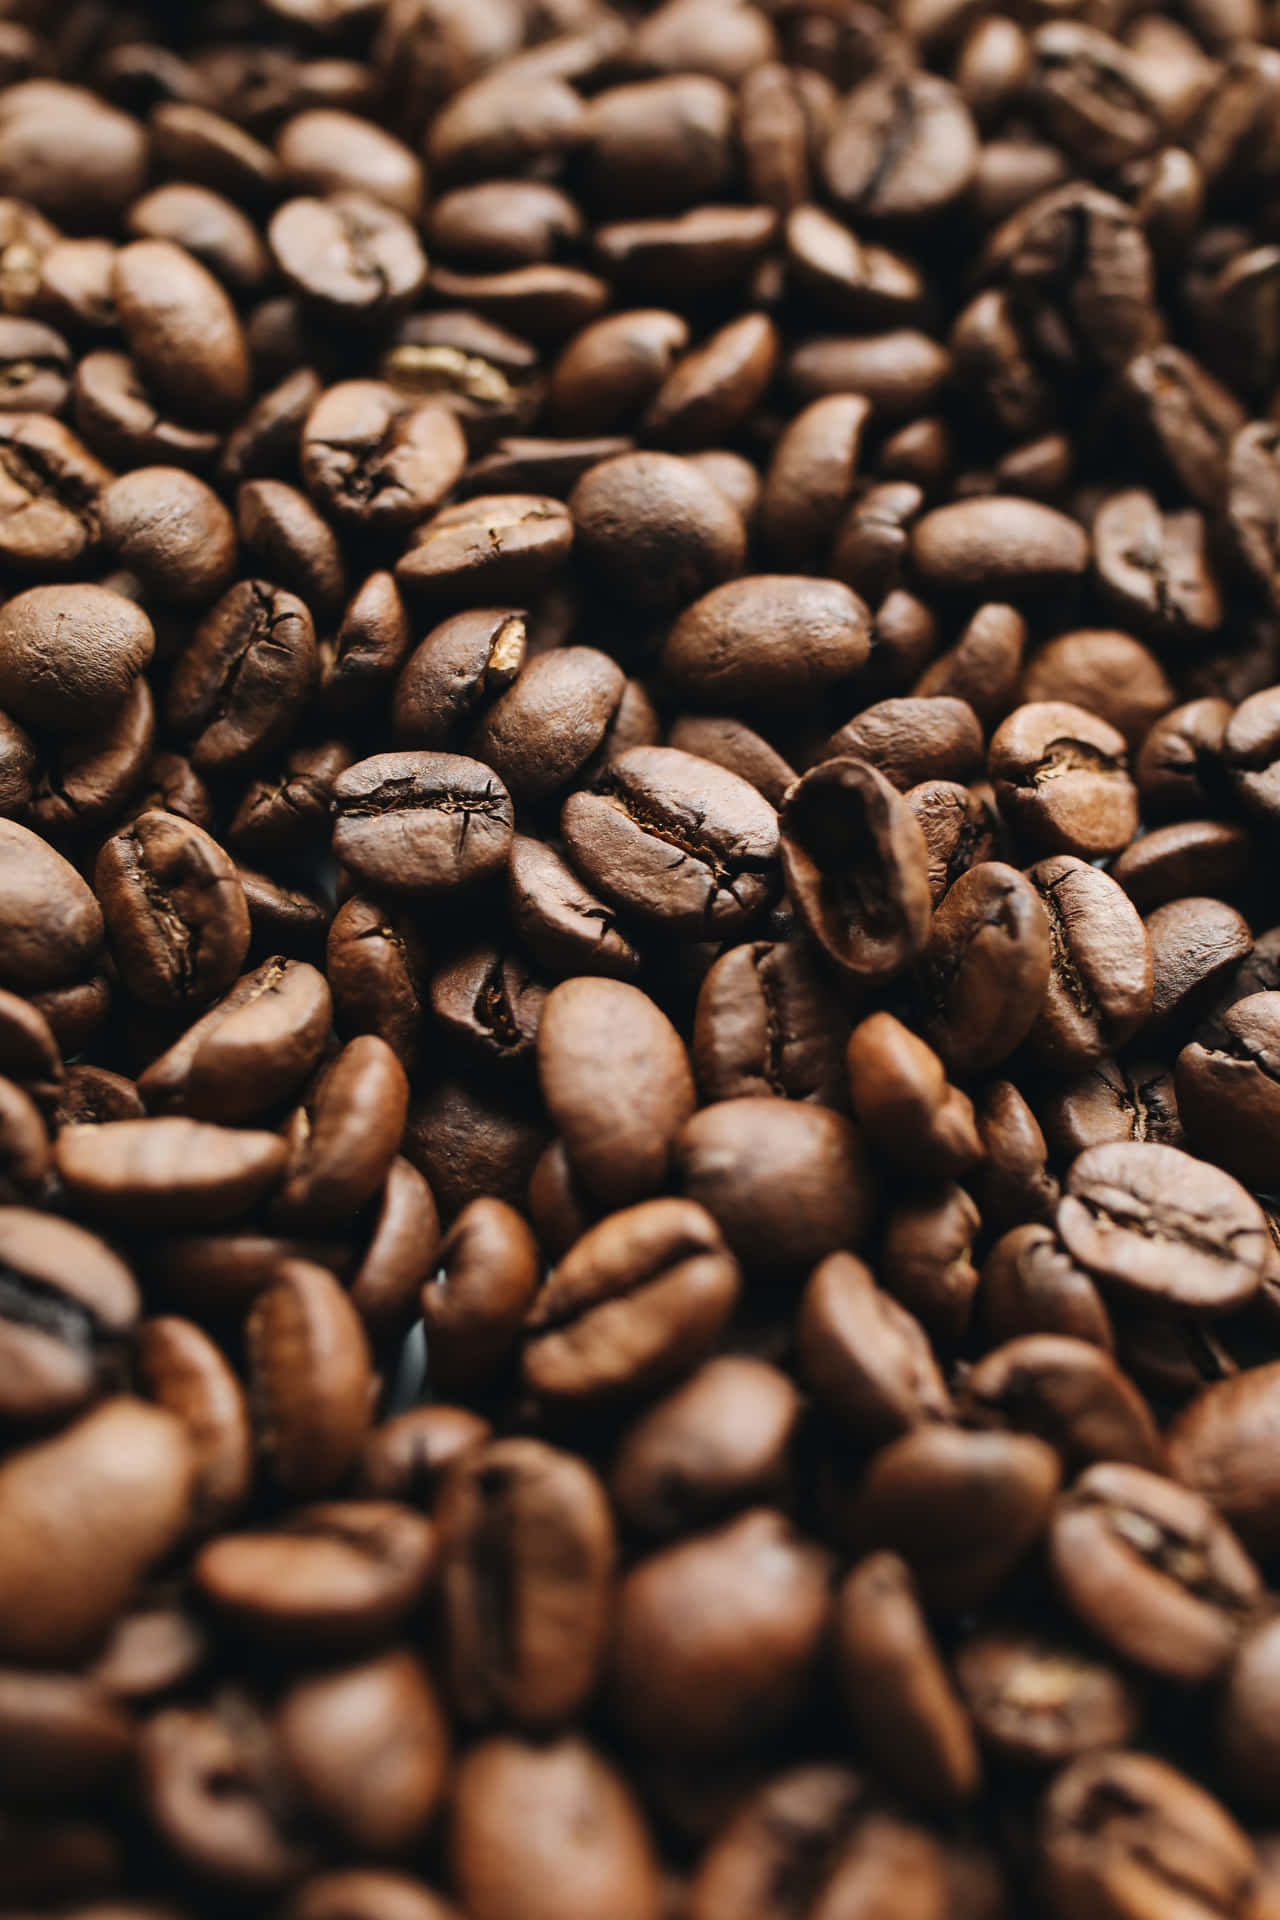 Coffee Beans Are Arranged In A Pile